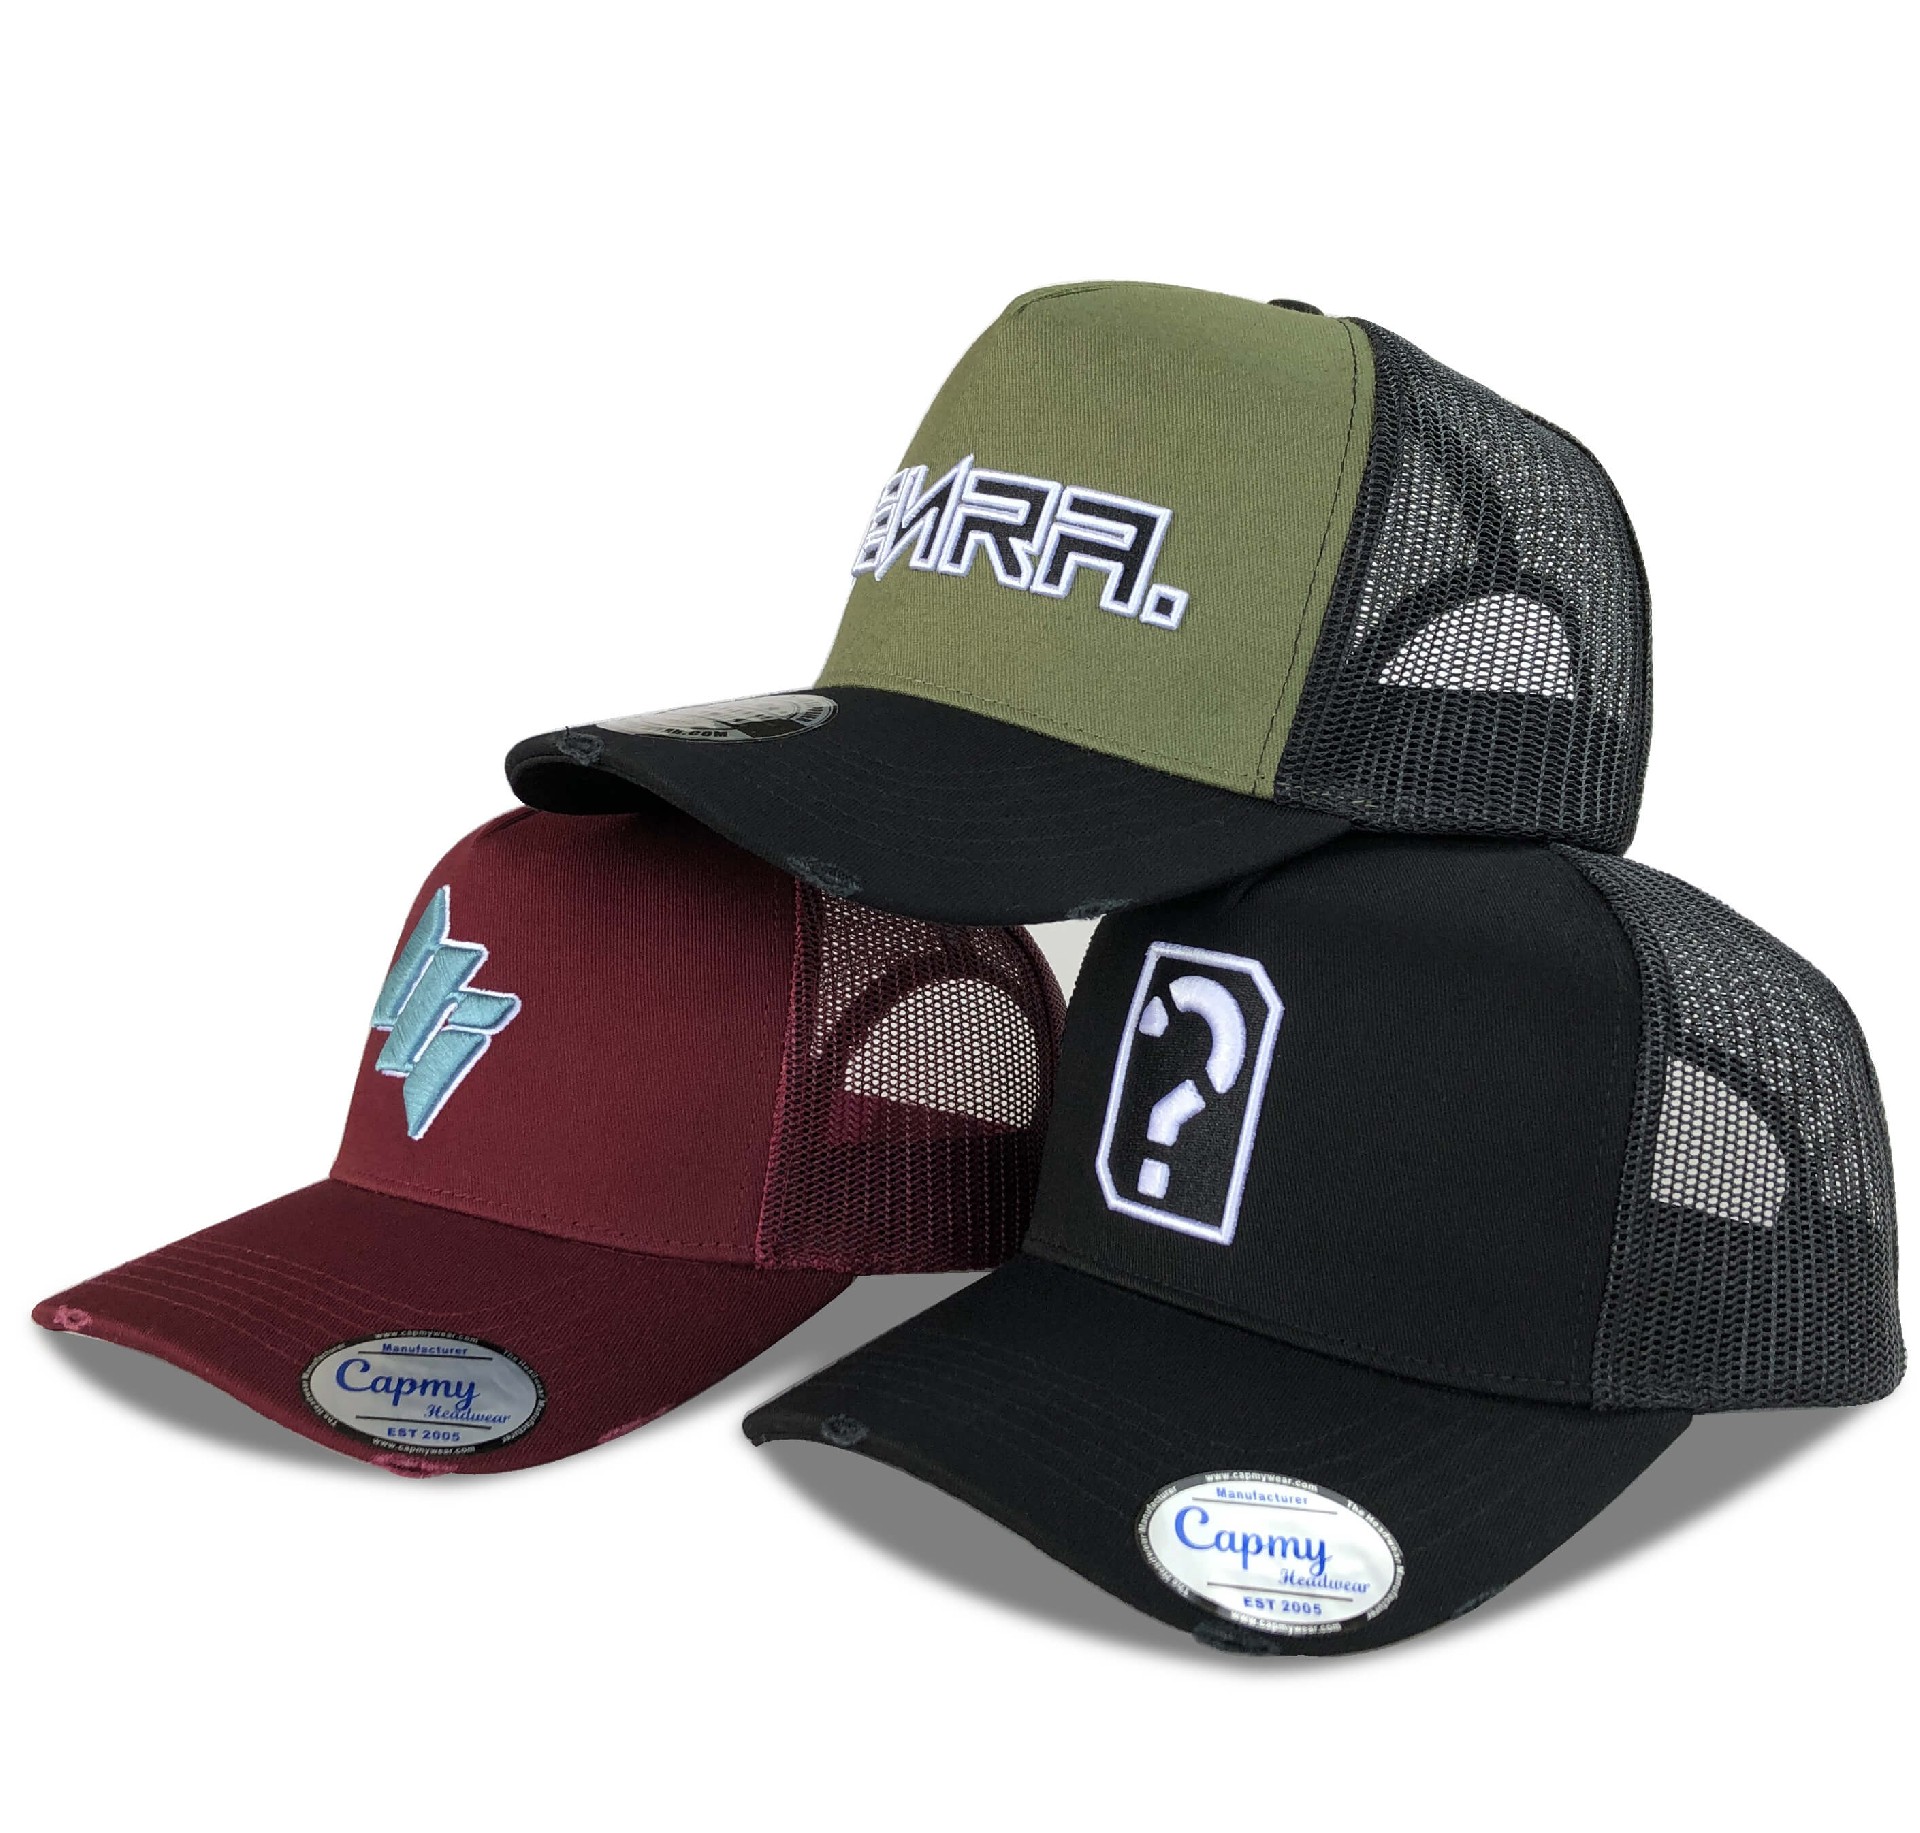 CMC-3120(Factory Customized 5 Panel 3D Embroidery Outdoor Sports Distressed Rip Vintage Black Yelir Trucker Hats)